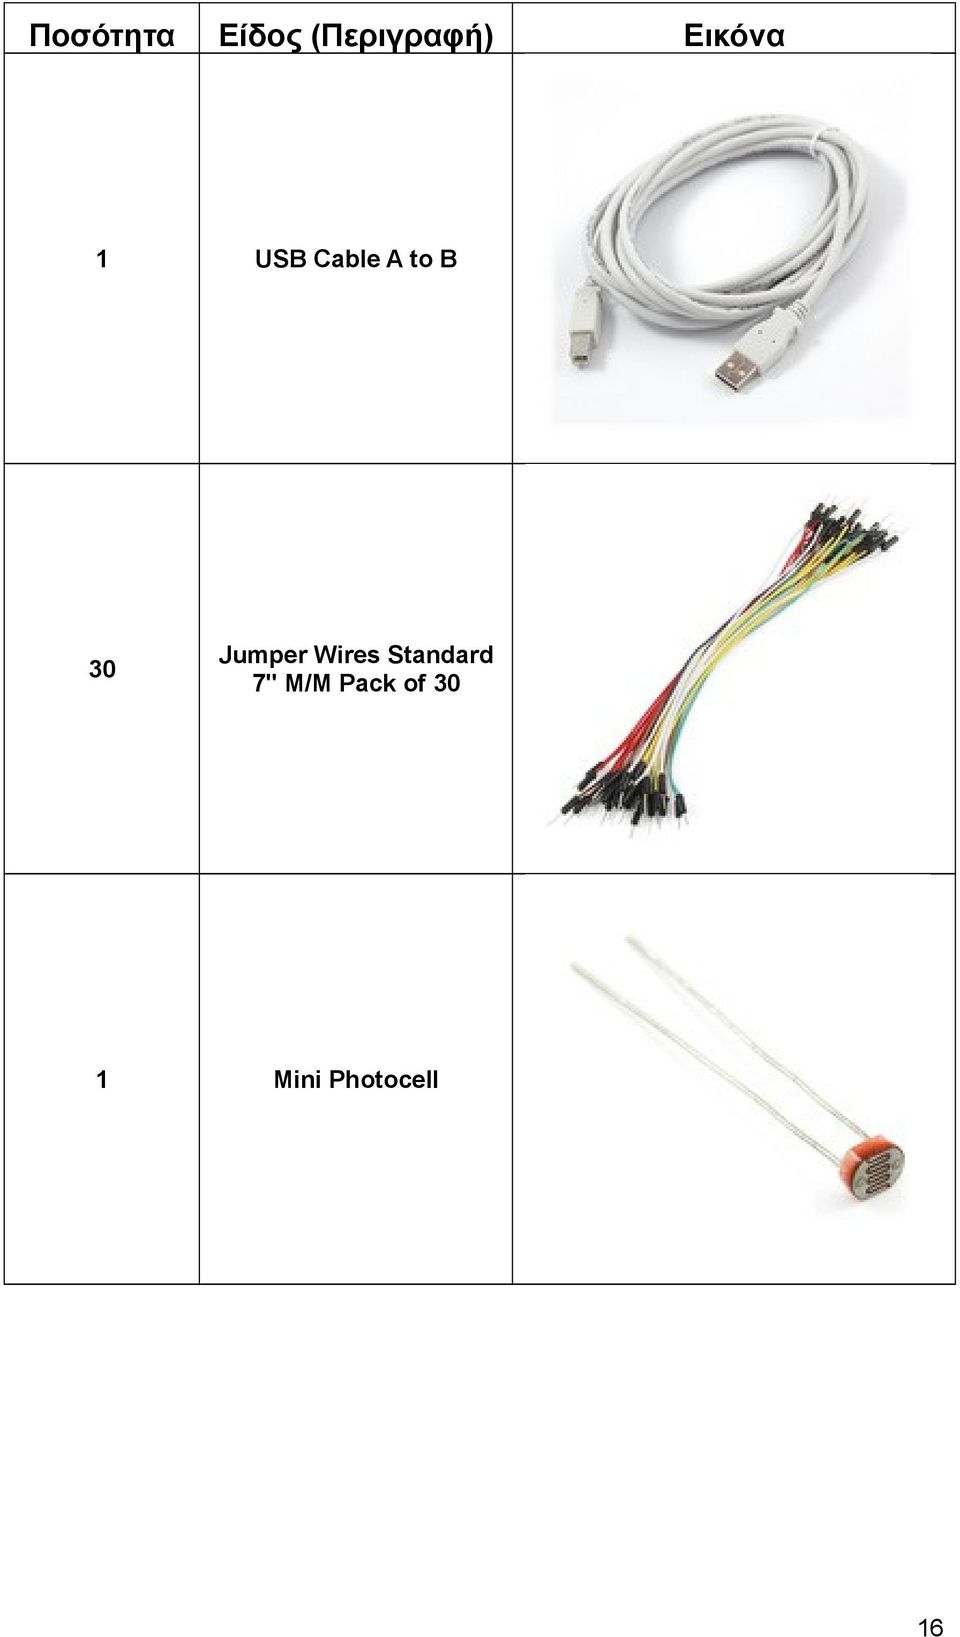 Wires Standard 7" M/M Pack